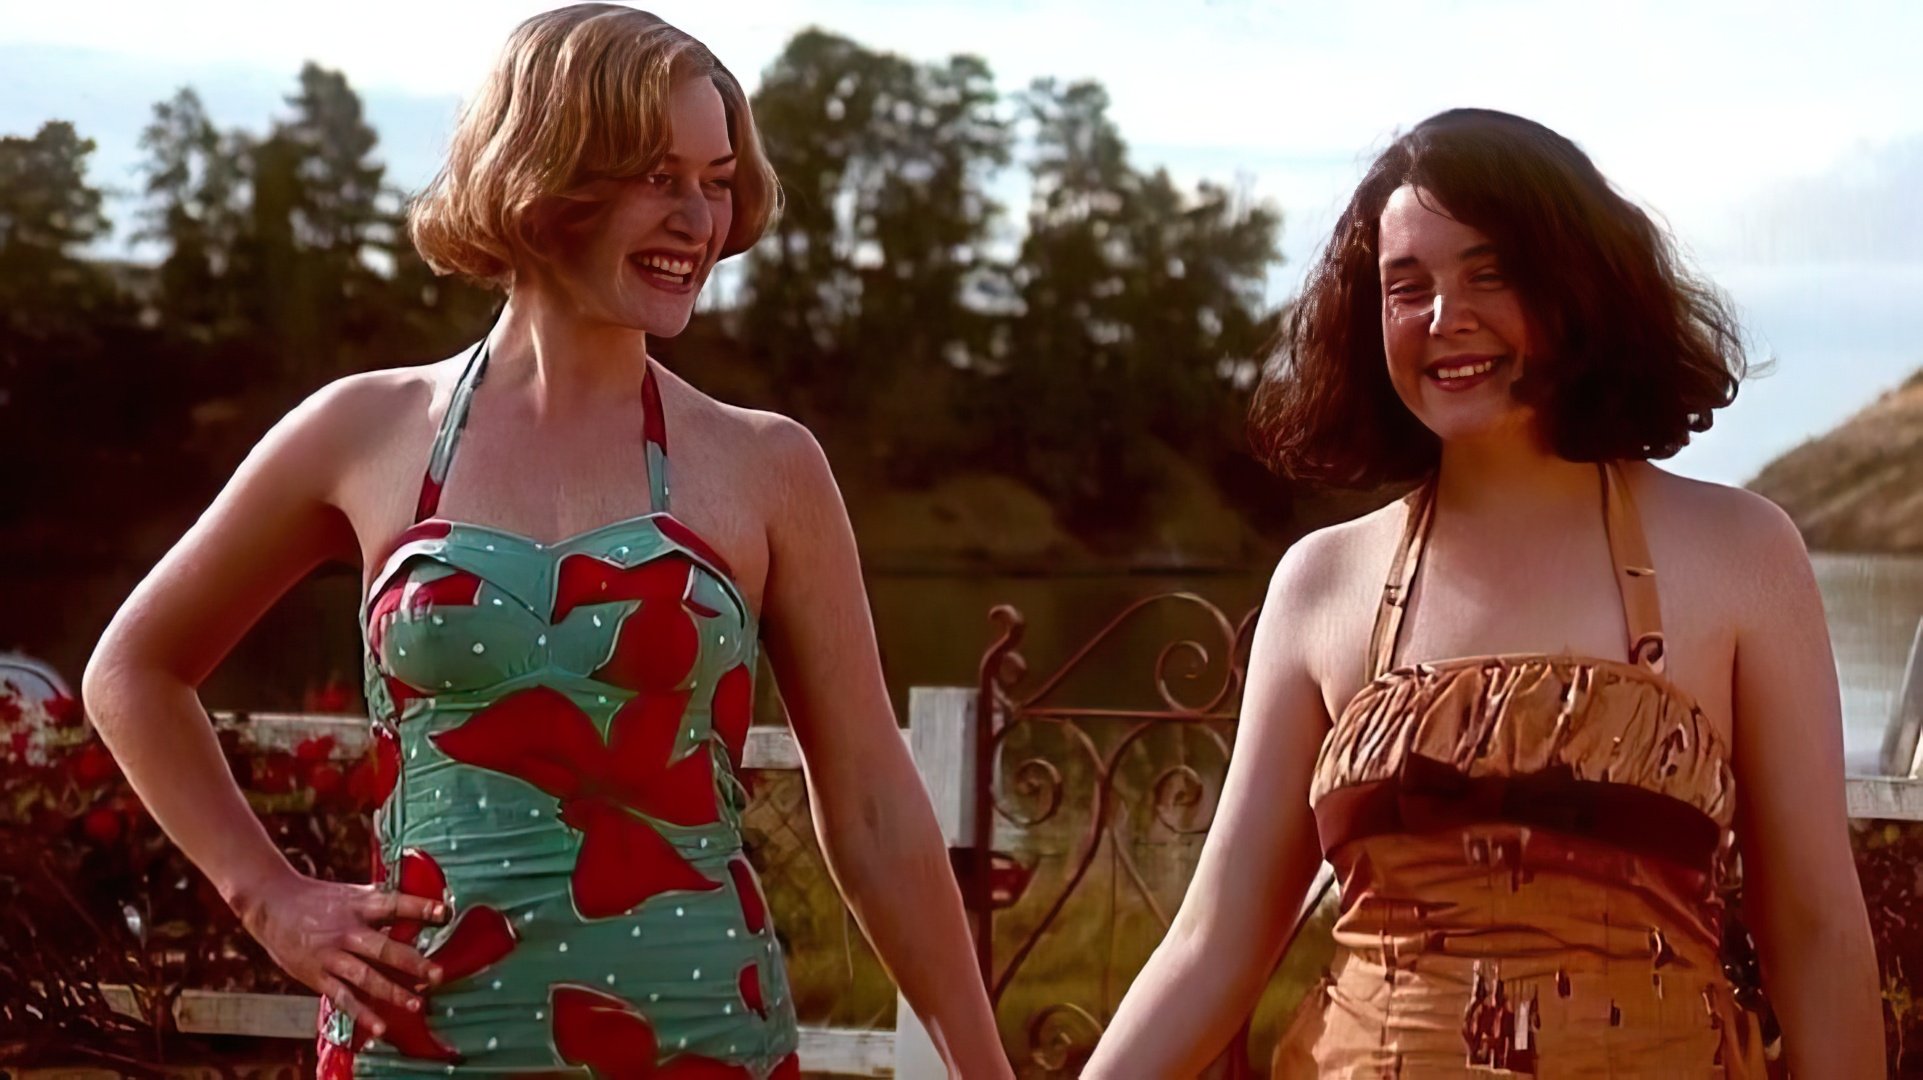 A frame from the movie 'Heavenly Creatures'